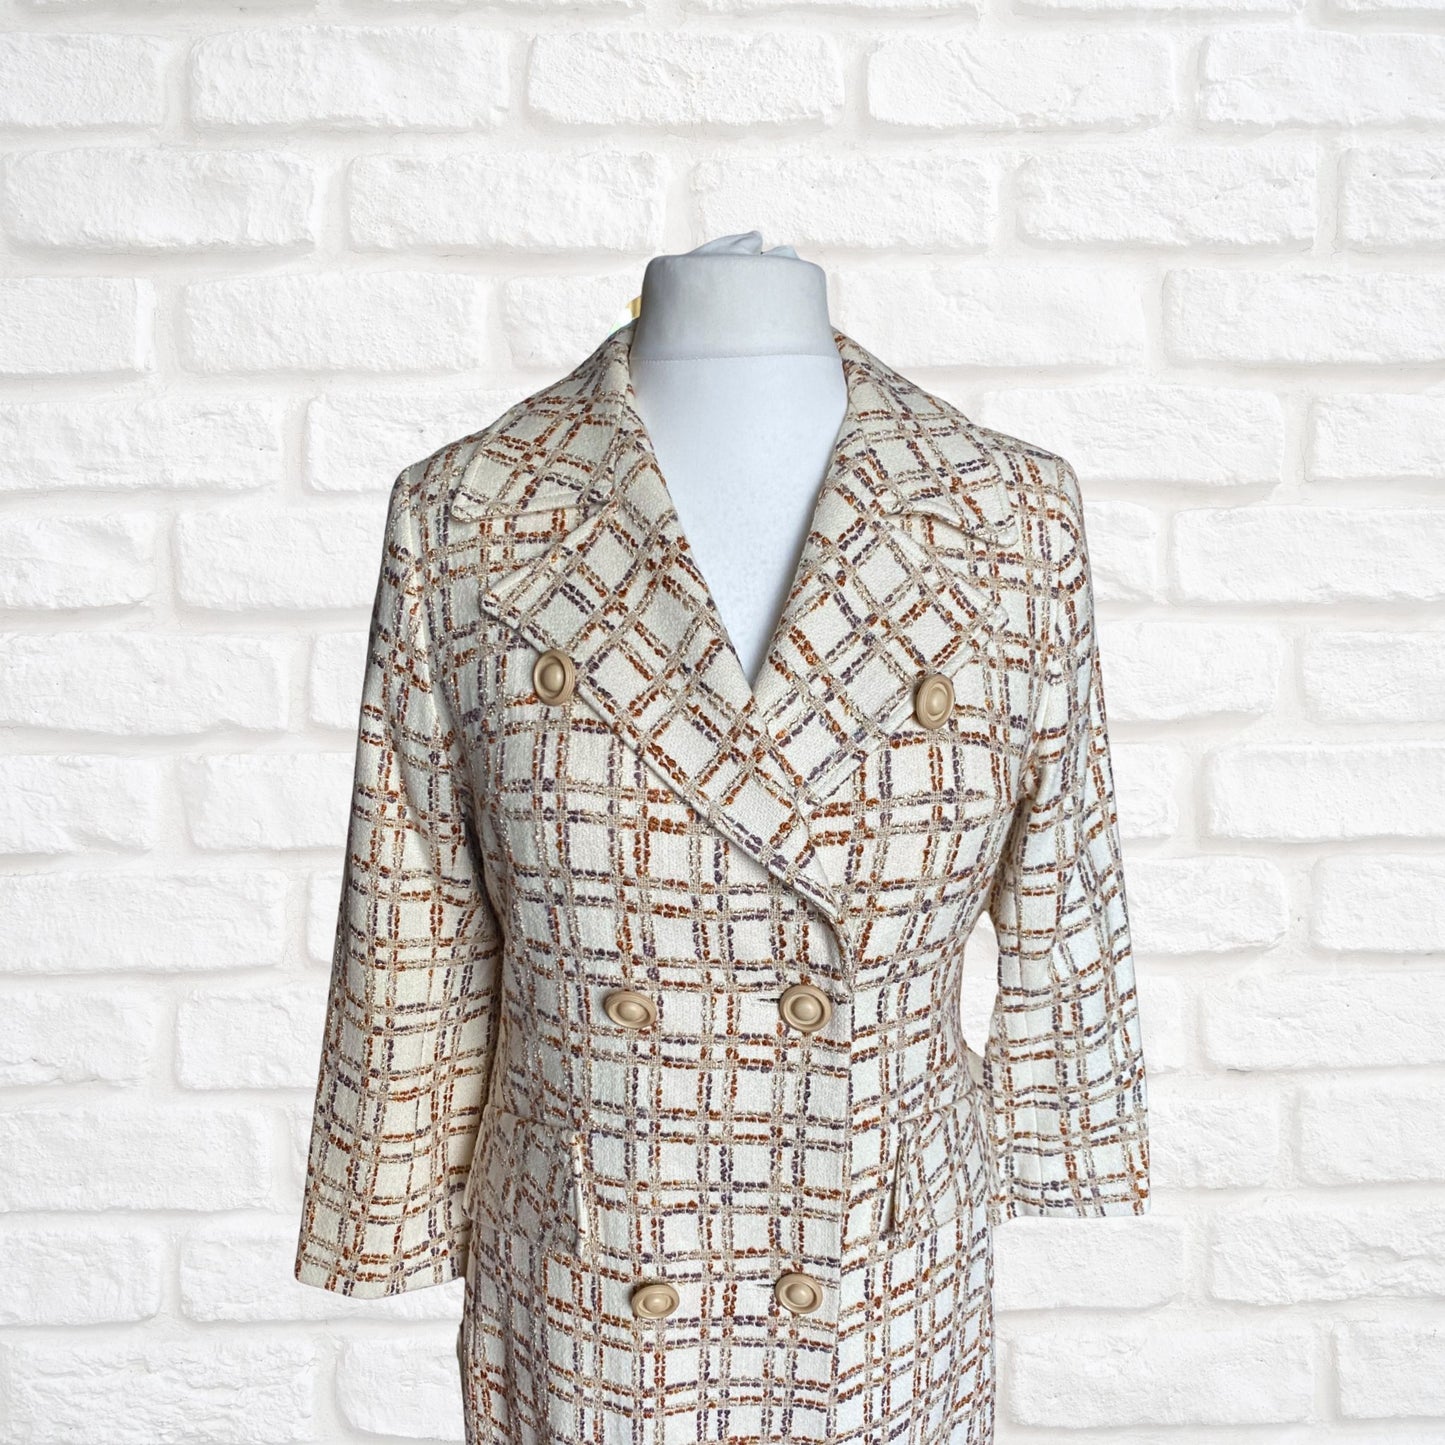 60s/70s vintage cream and copper wool blend coat. Approx UK size 12-14